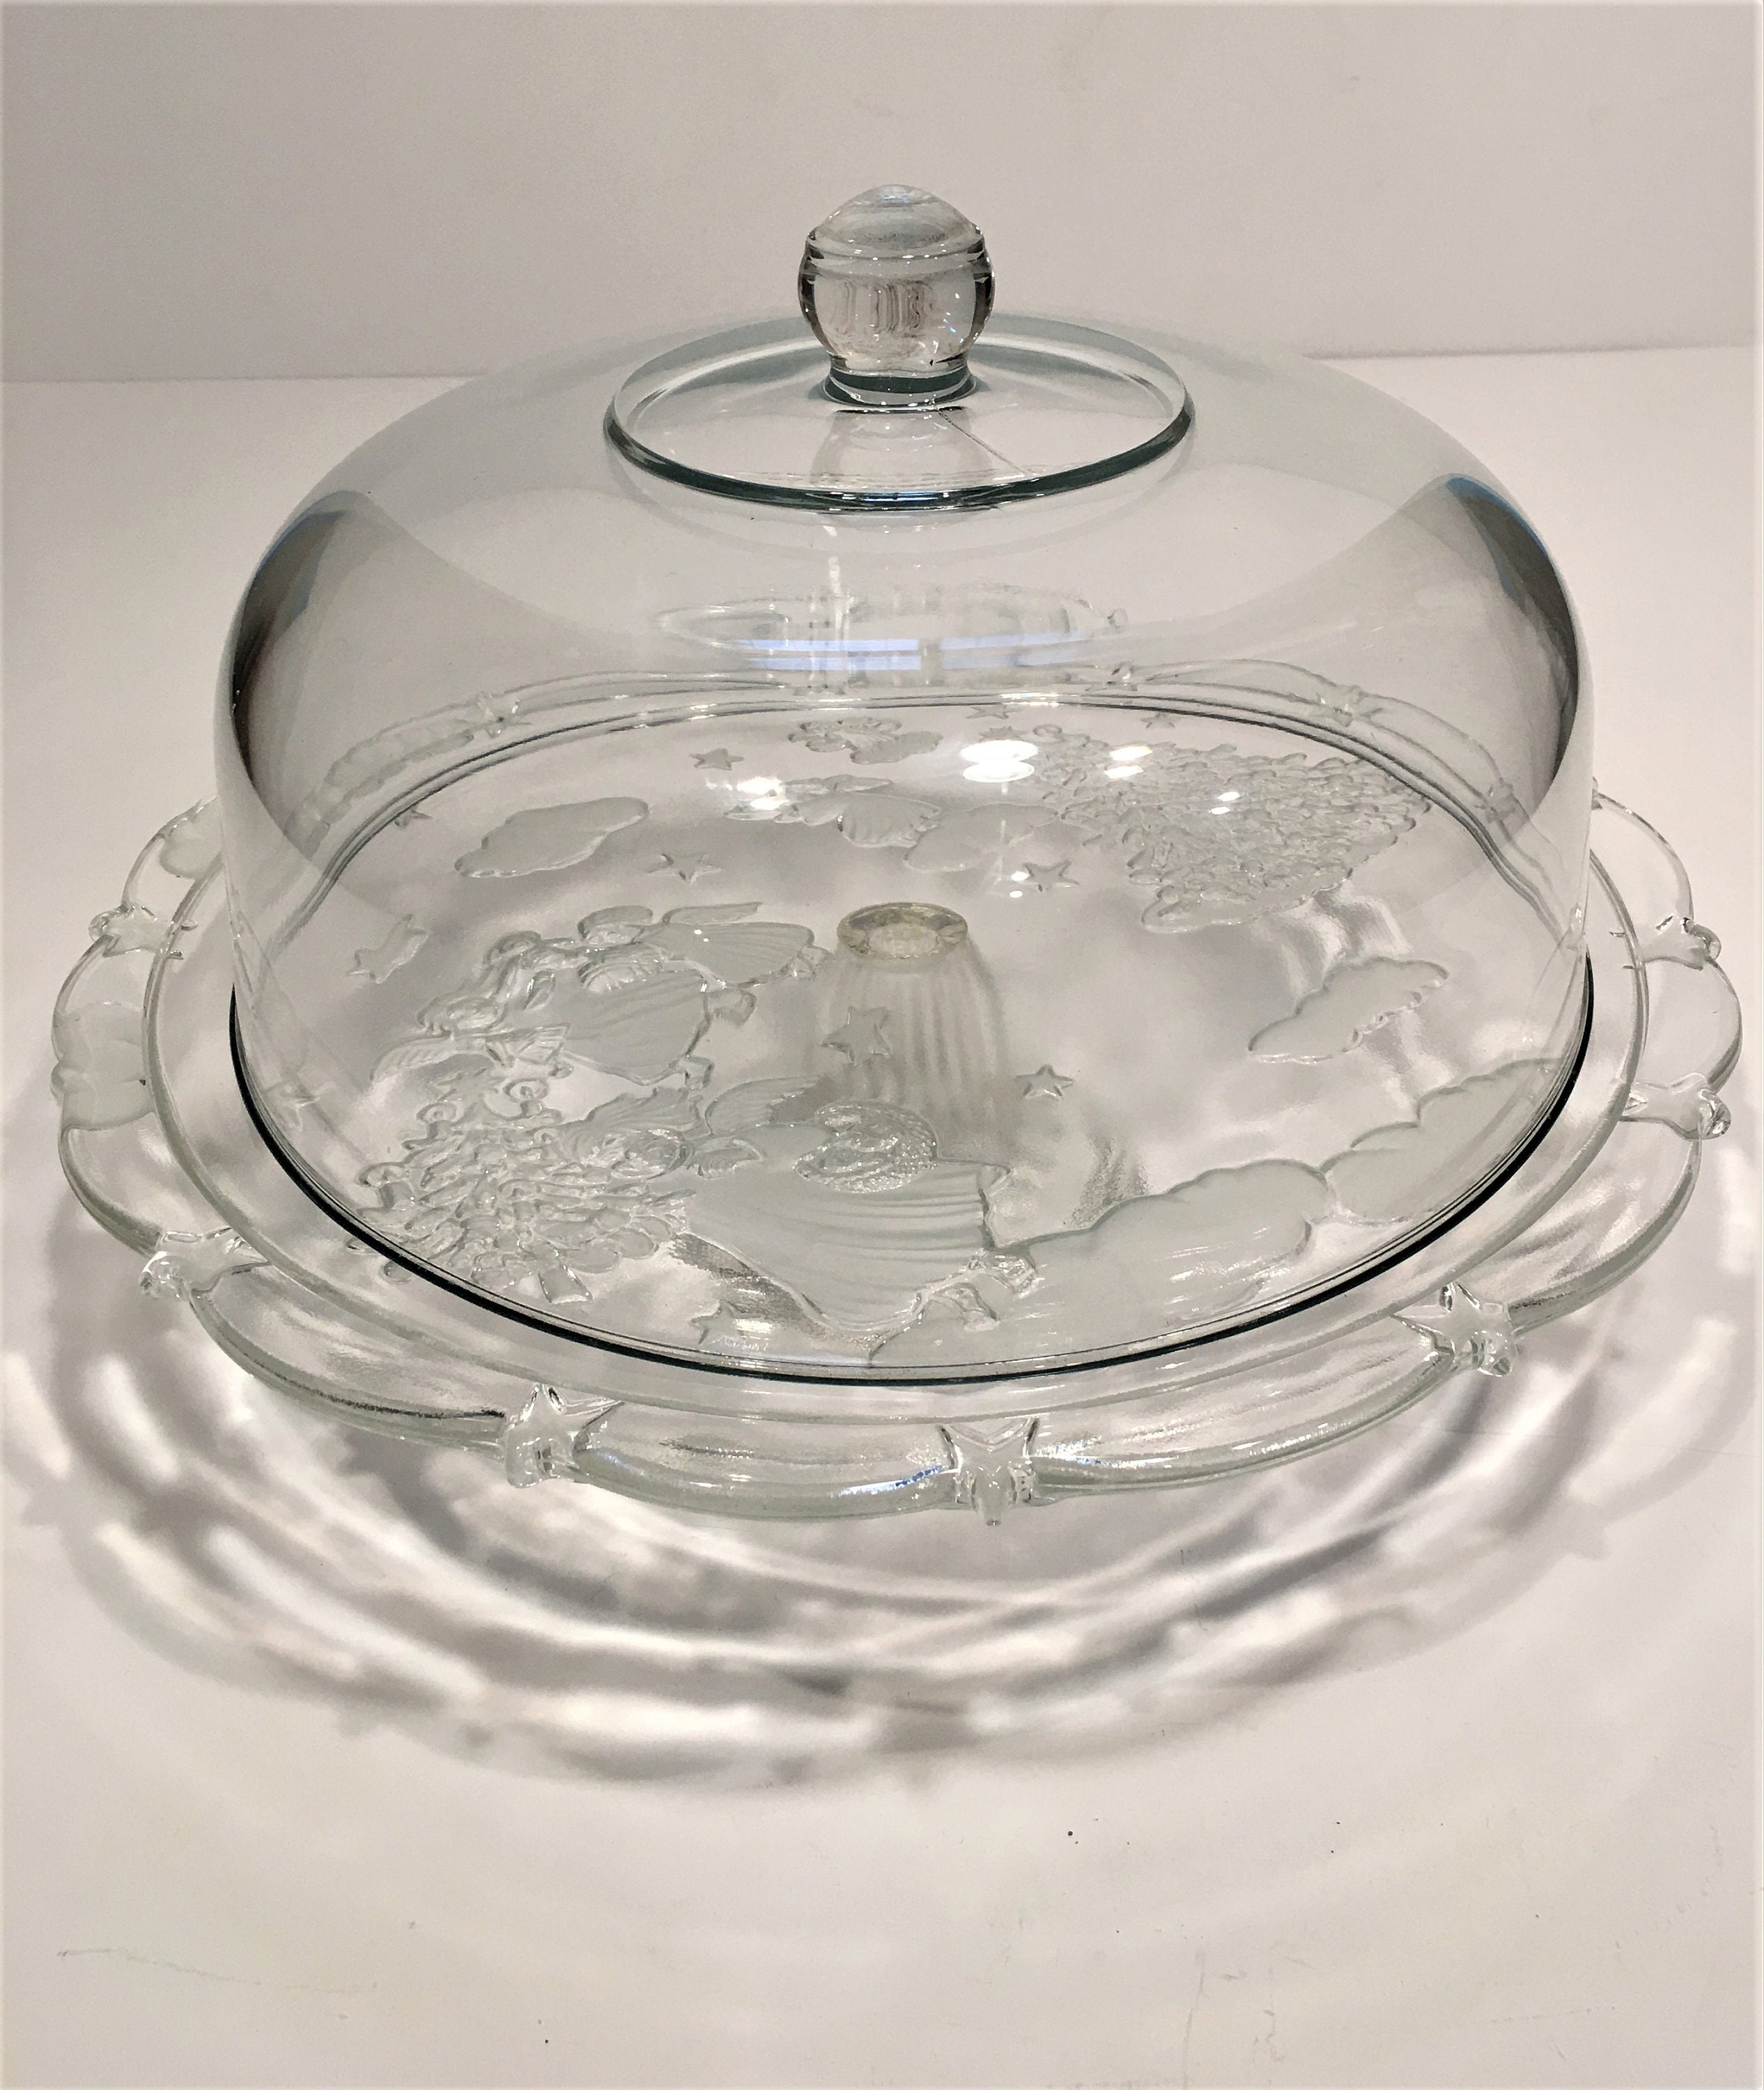 CALLARON 1pc Cake Stand Lid Rectangular Cake Stand Clear Glass Serving  Platter with Lid Food Covers for Outside Party for Food Butter Dish with  Lid